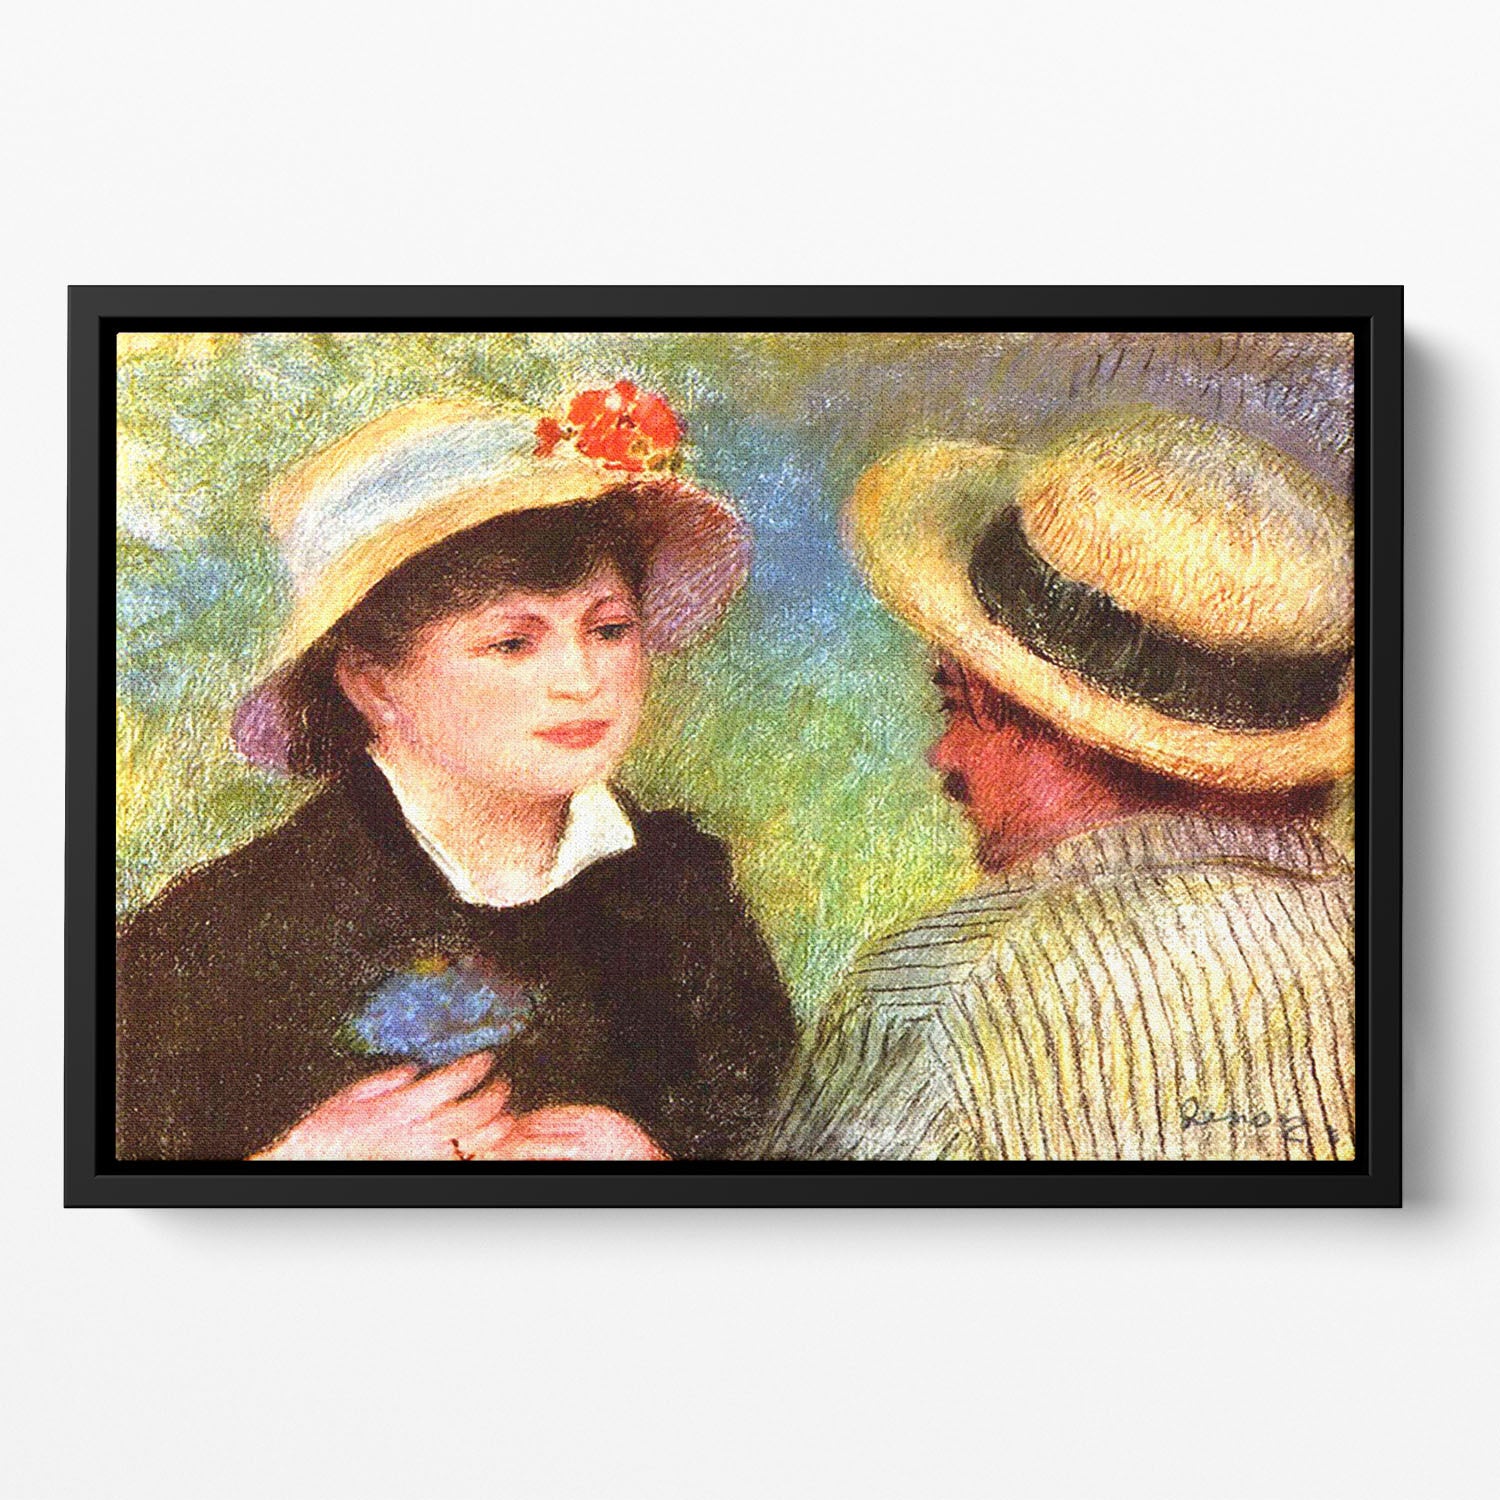 Les Canotiers by Renoir Floating Framed Canvas